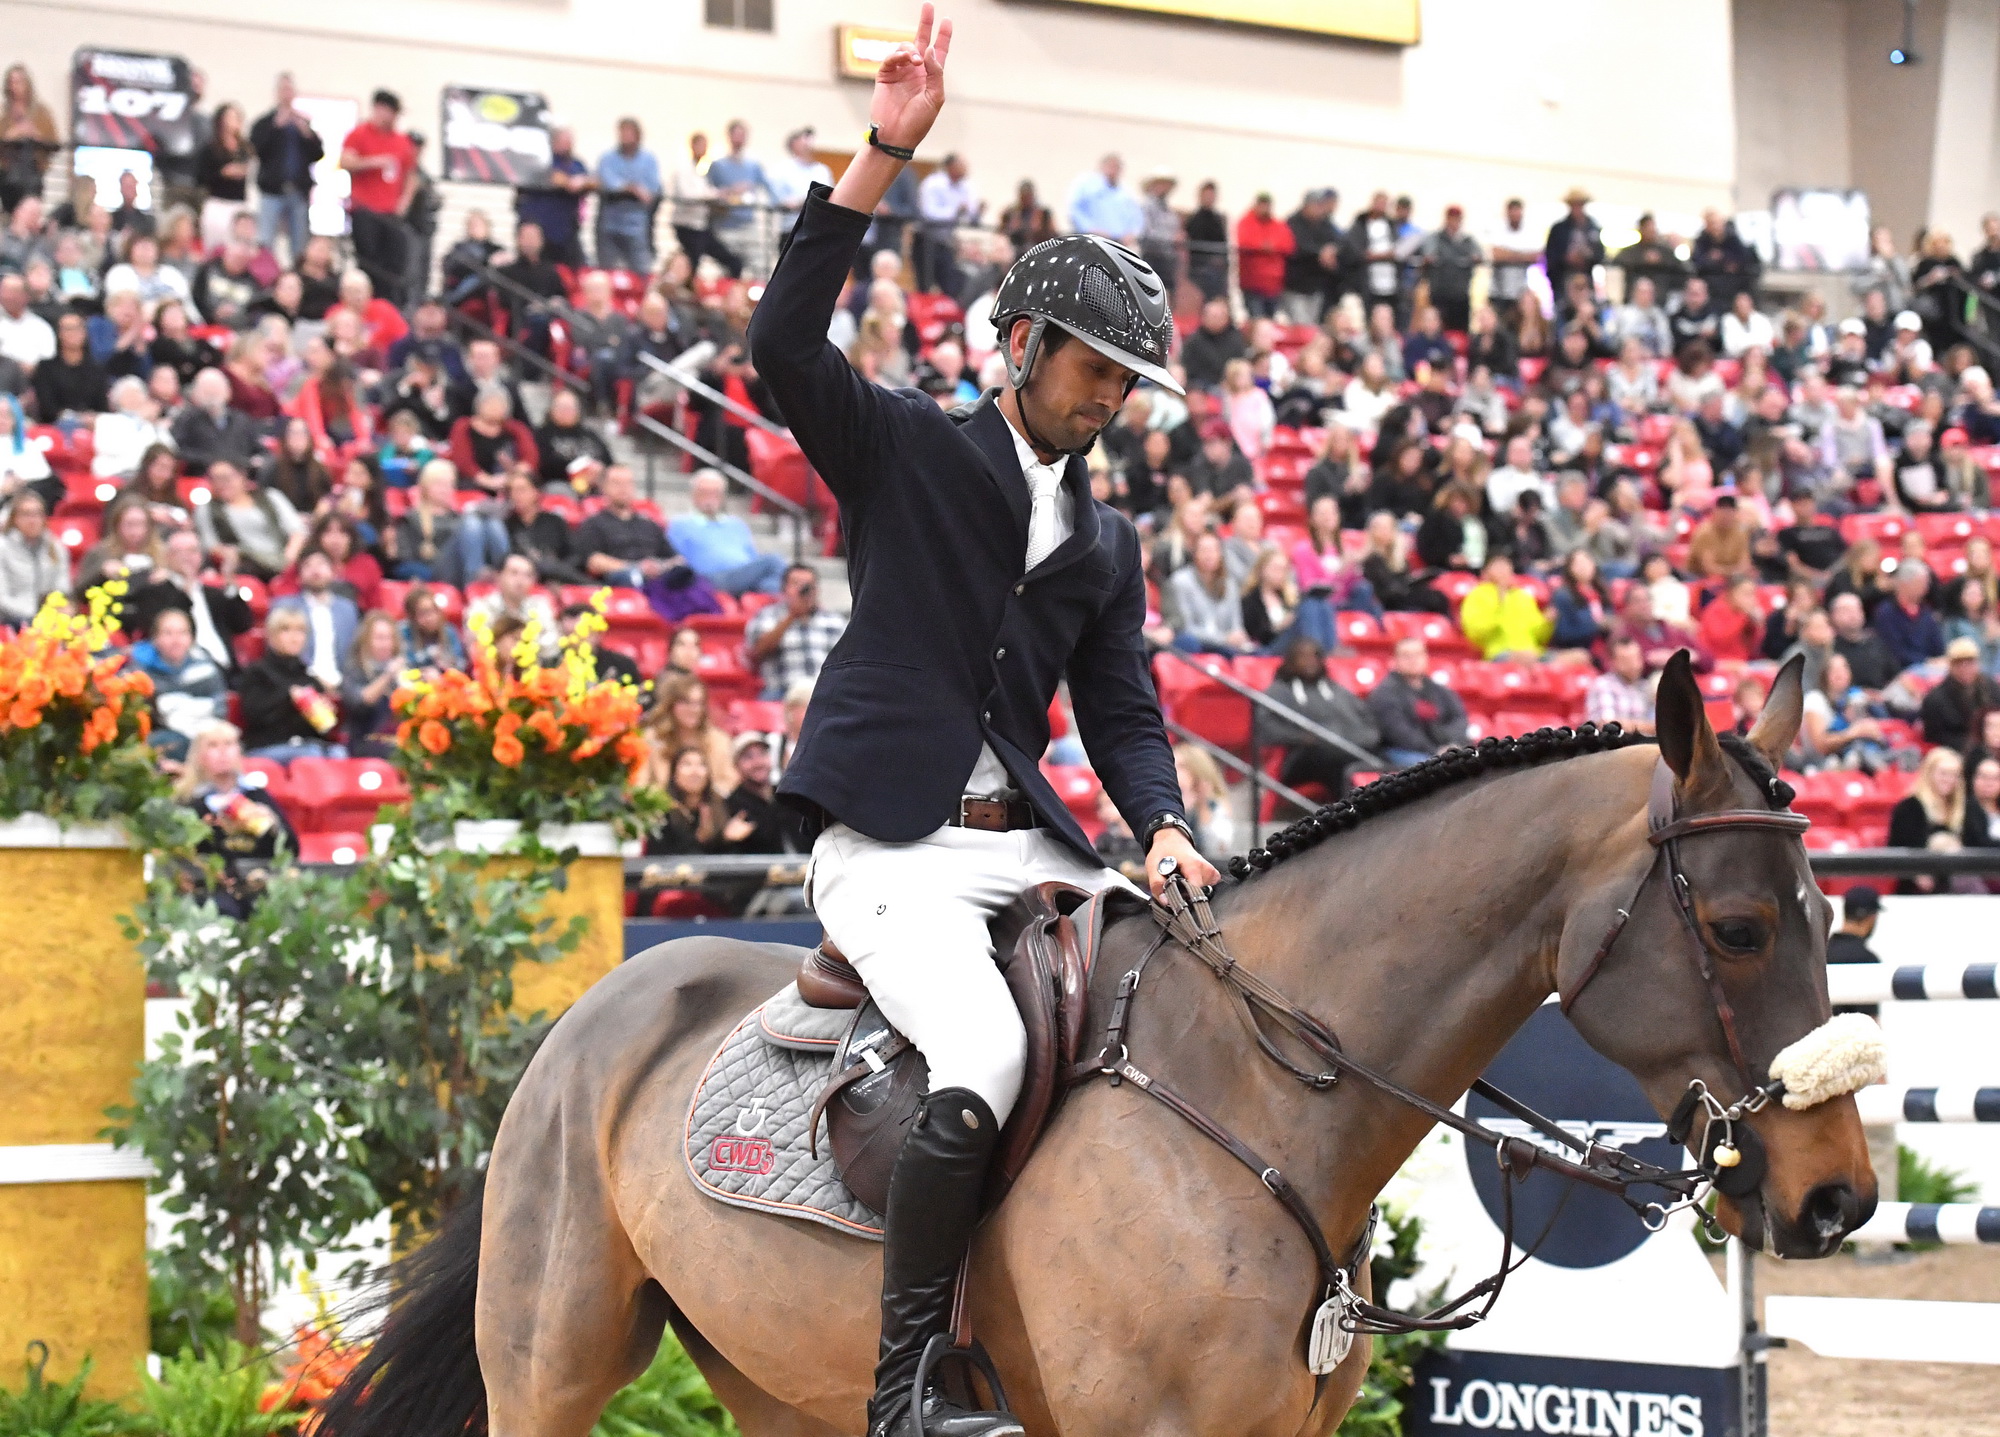 For the second week in a row, Nayel Nassar (EGY) and his longtime partner Lordan clinch another victory, winning the Longines FEI Jumping World Cup™ Las Vegas (USA) on Saturday 17 November 2018. (FEI/Andrew Ryback)